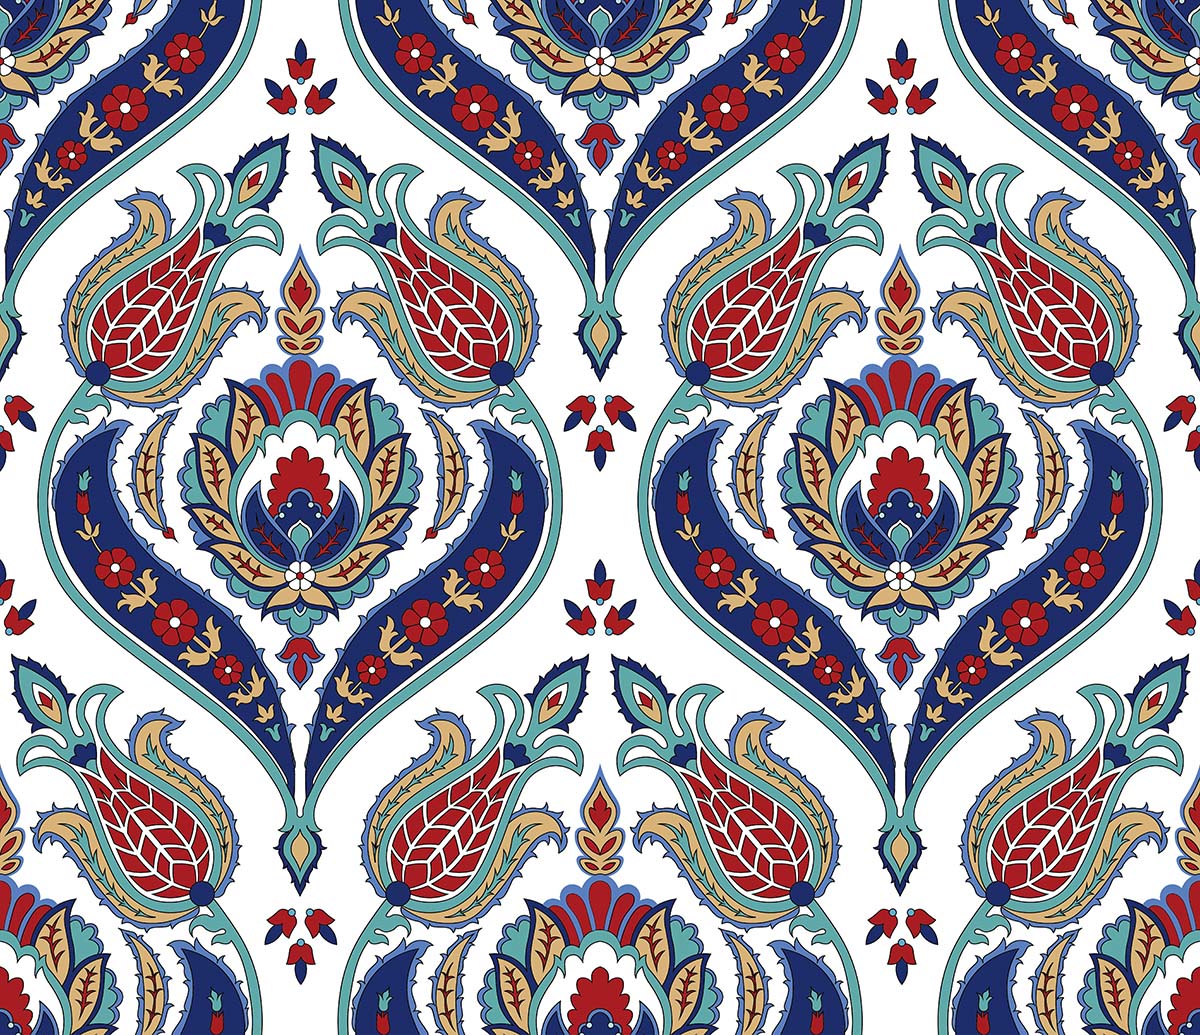 A colorful pattern on a white background